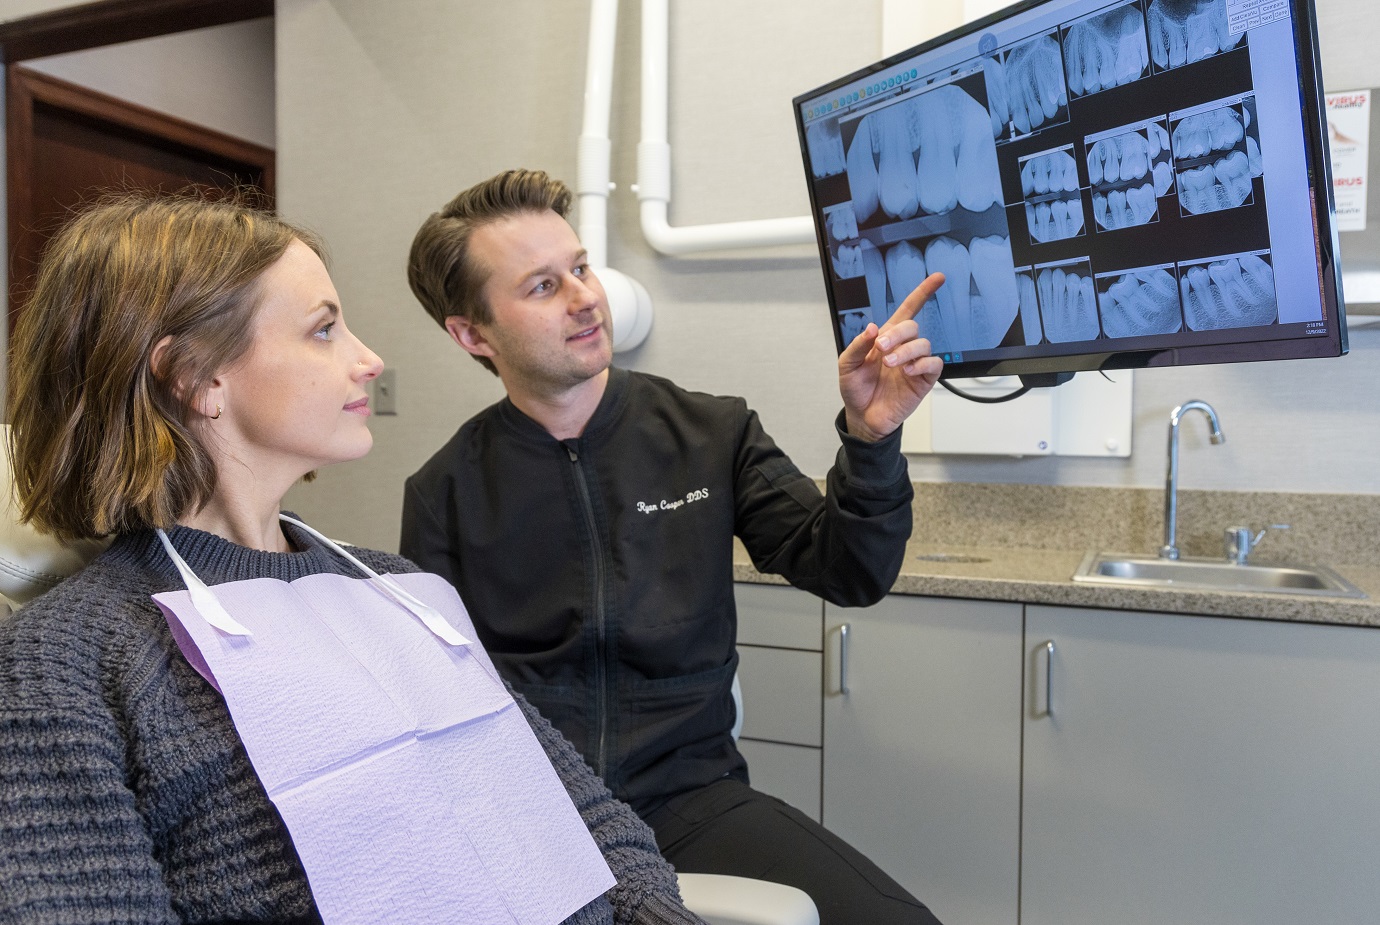 A dentist is showing X-rays to his patient